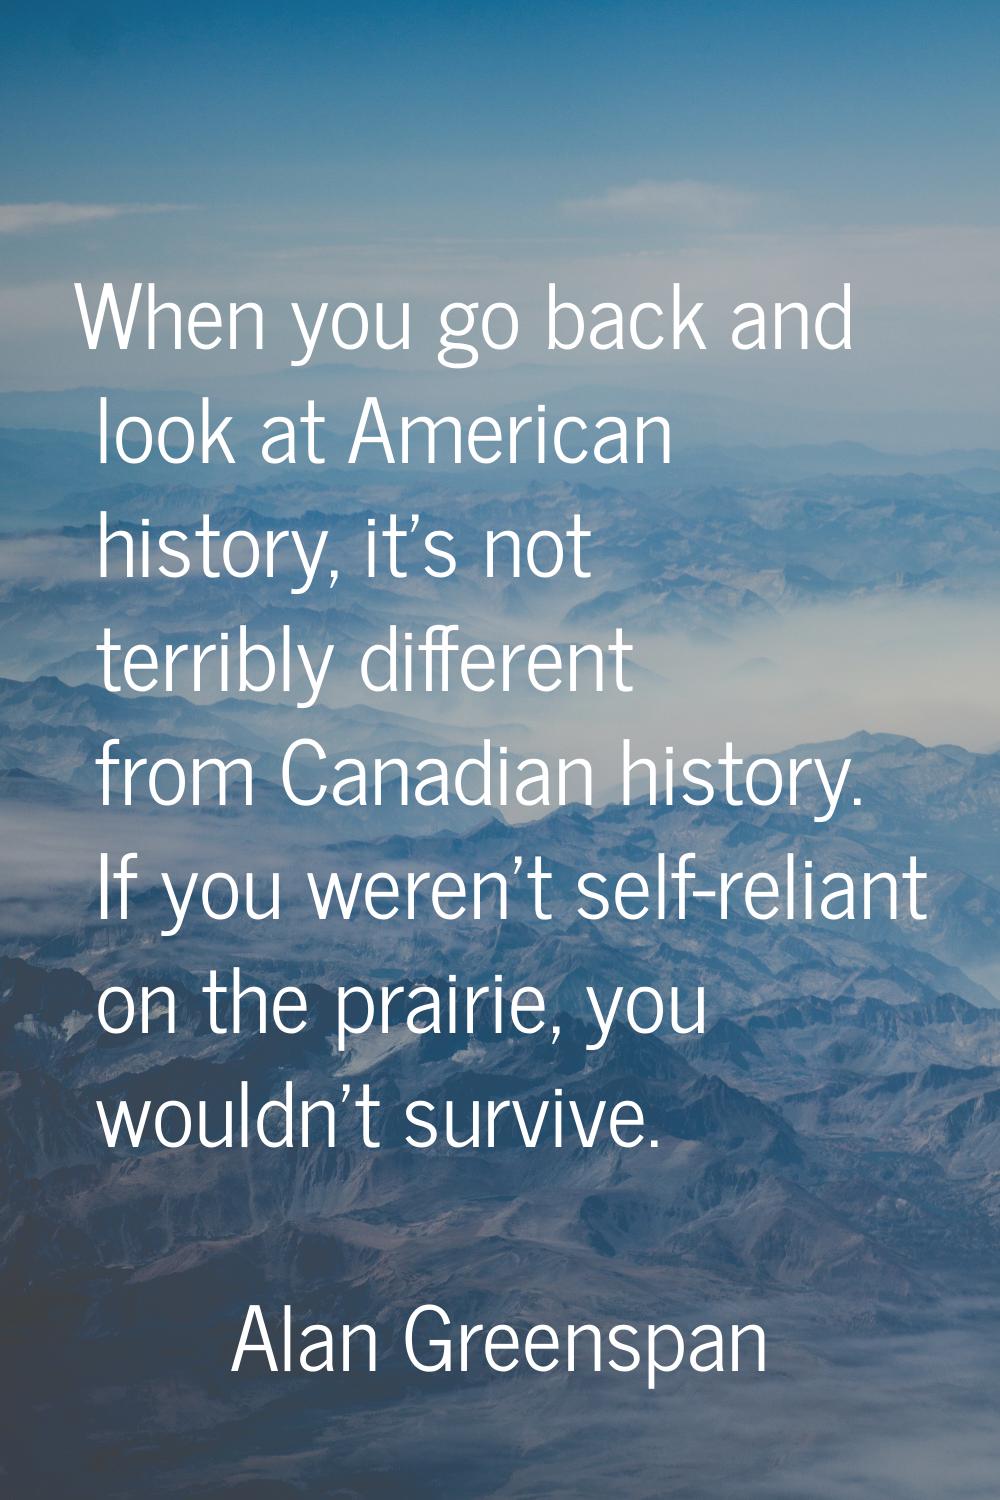 When you go back and look at American history, it's not terribly different from Canadian history. I